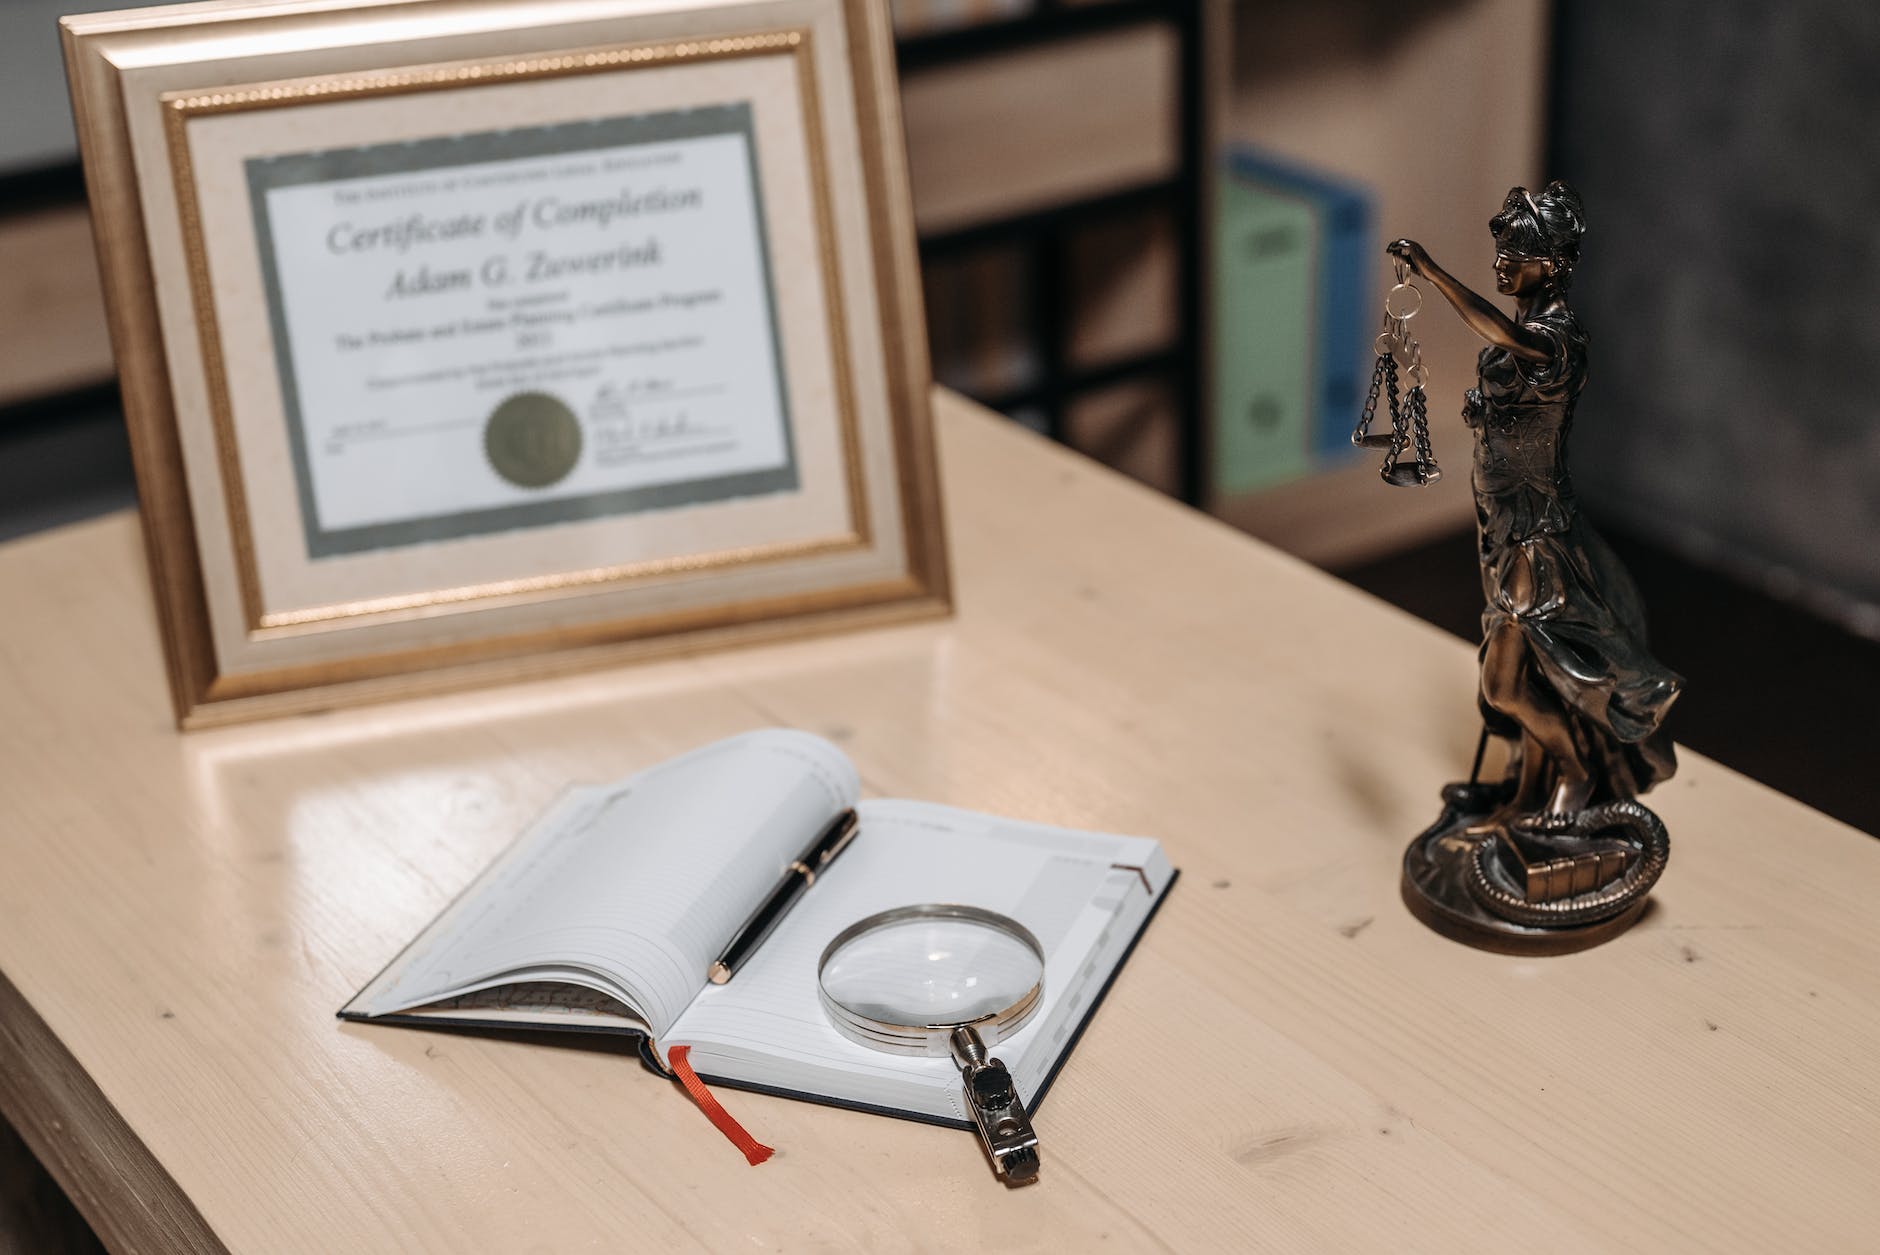 Photo of a framed certificate on a table top